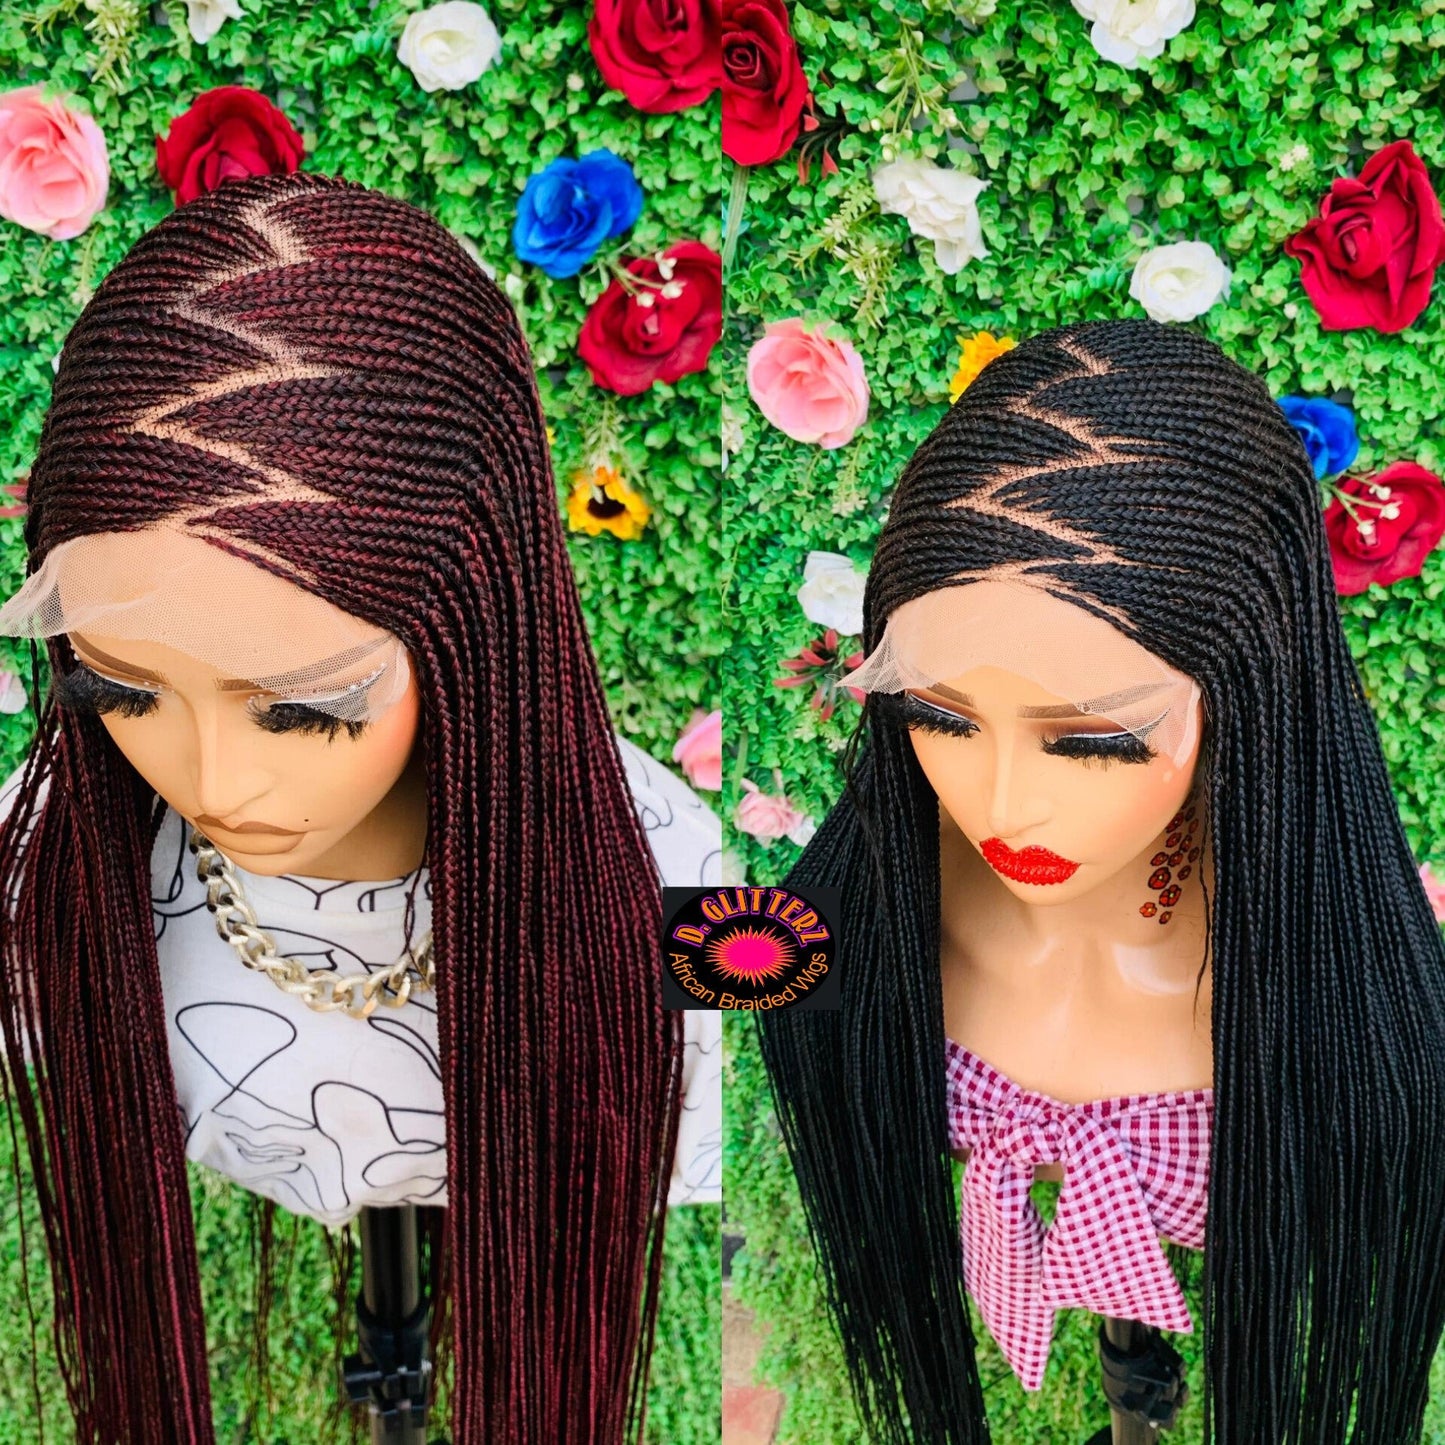 AFRICAN BRAIDED WIGS ON 7*7 LACE CLOSURE - d.glitterzwigs